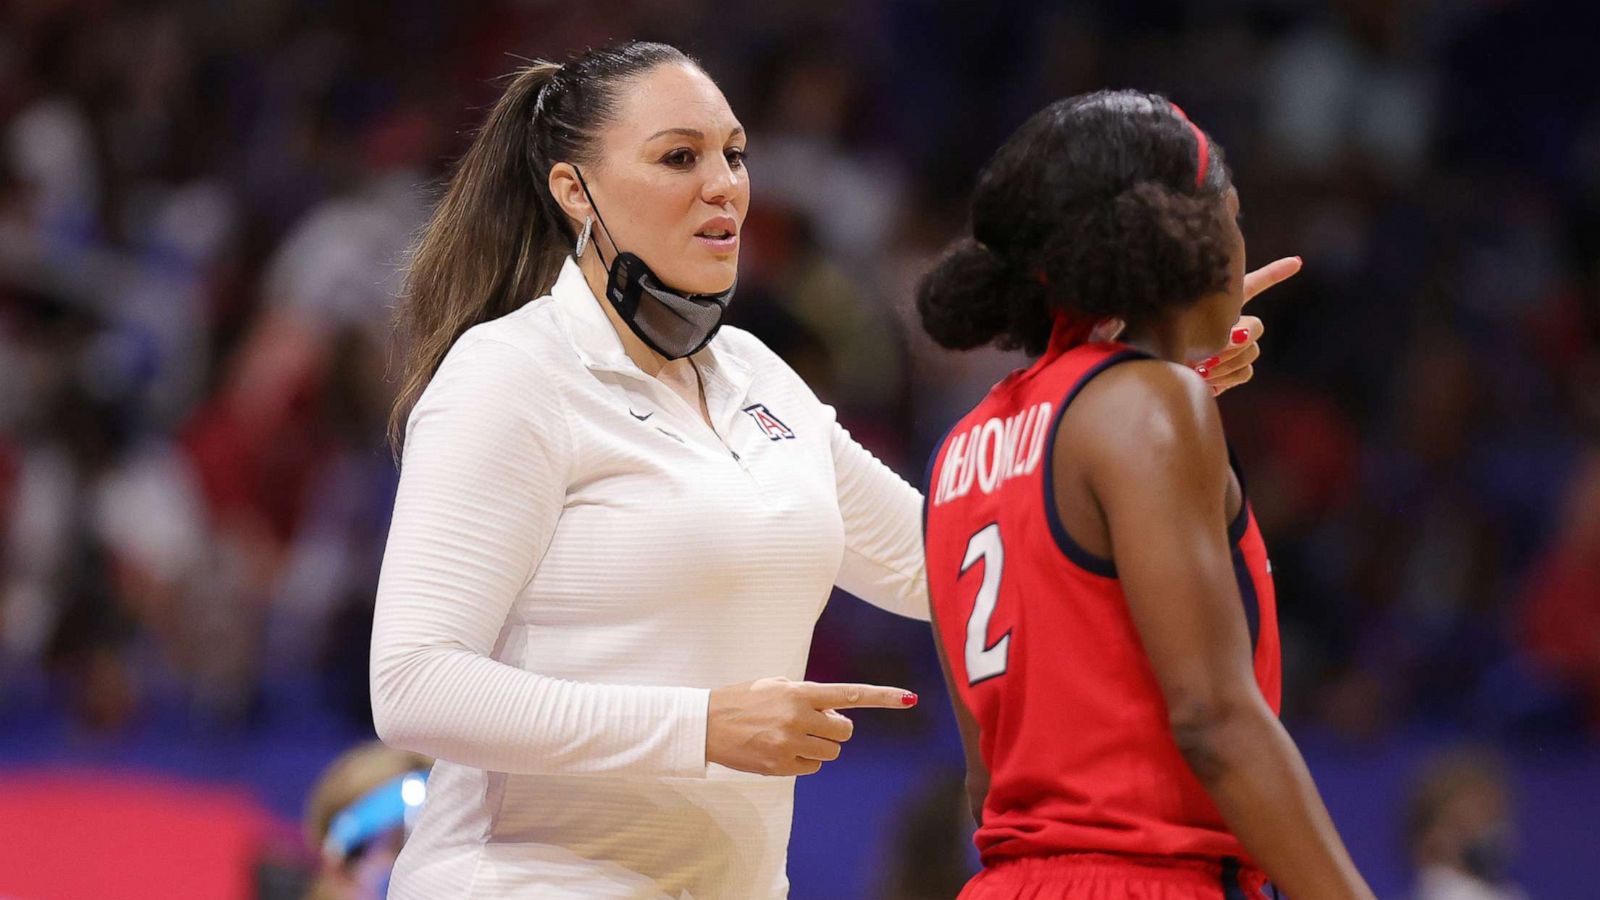 NCAA coach reportedly pumped breast milk during halftime of women's  championship game - Good Morning America